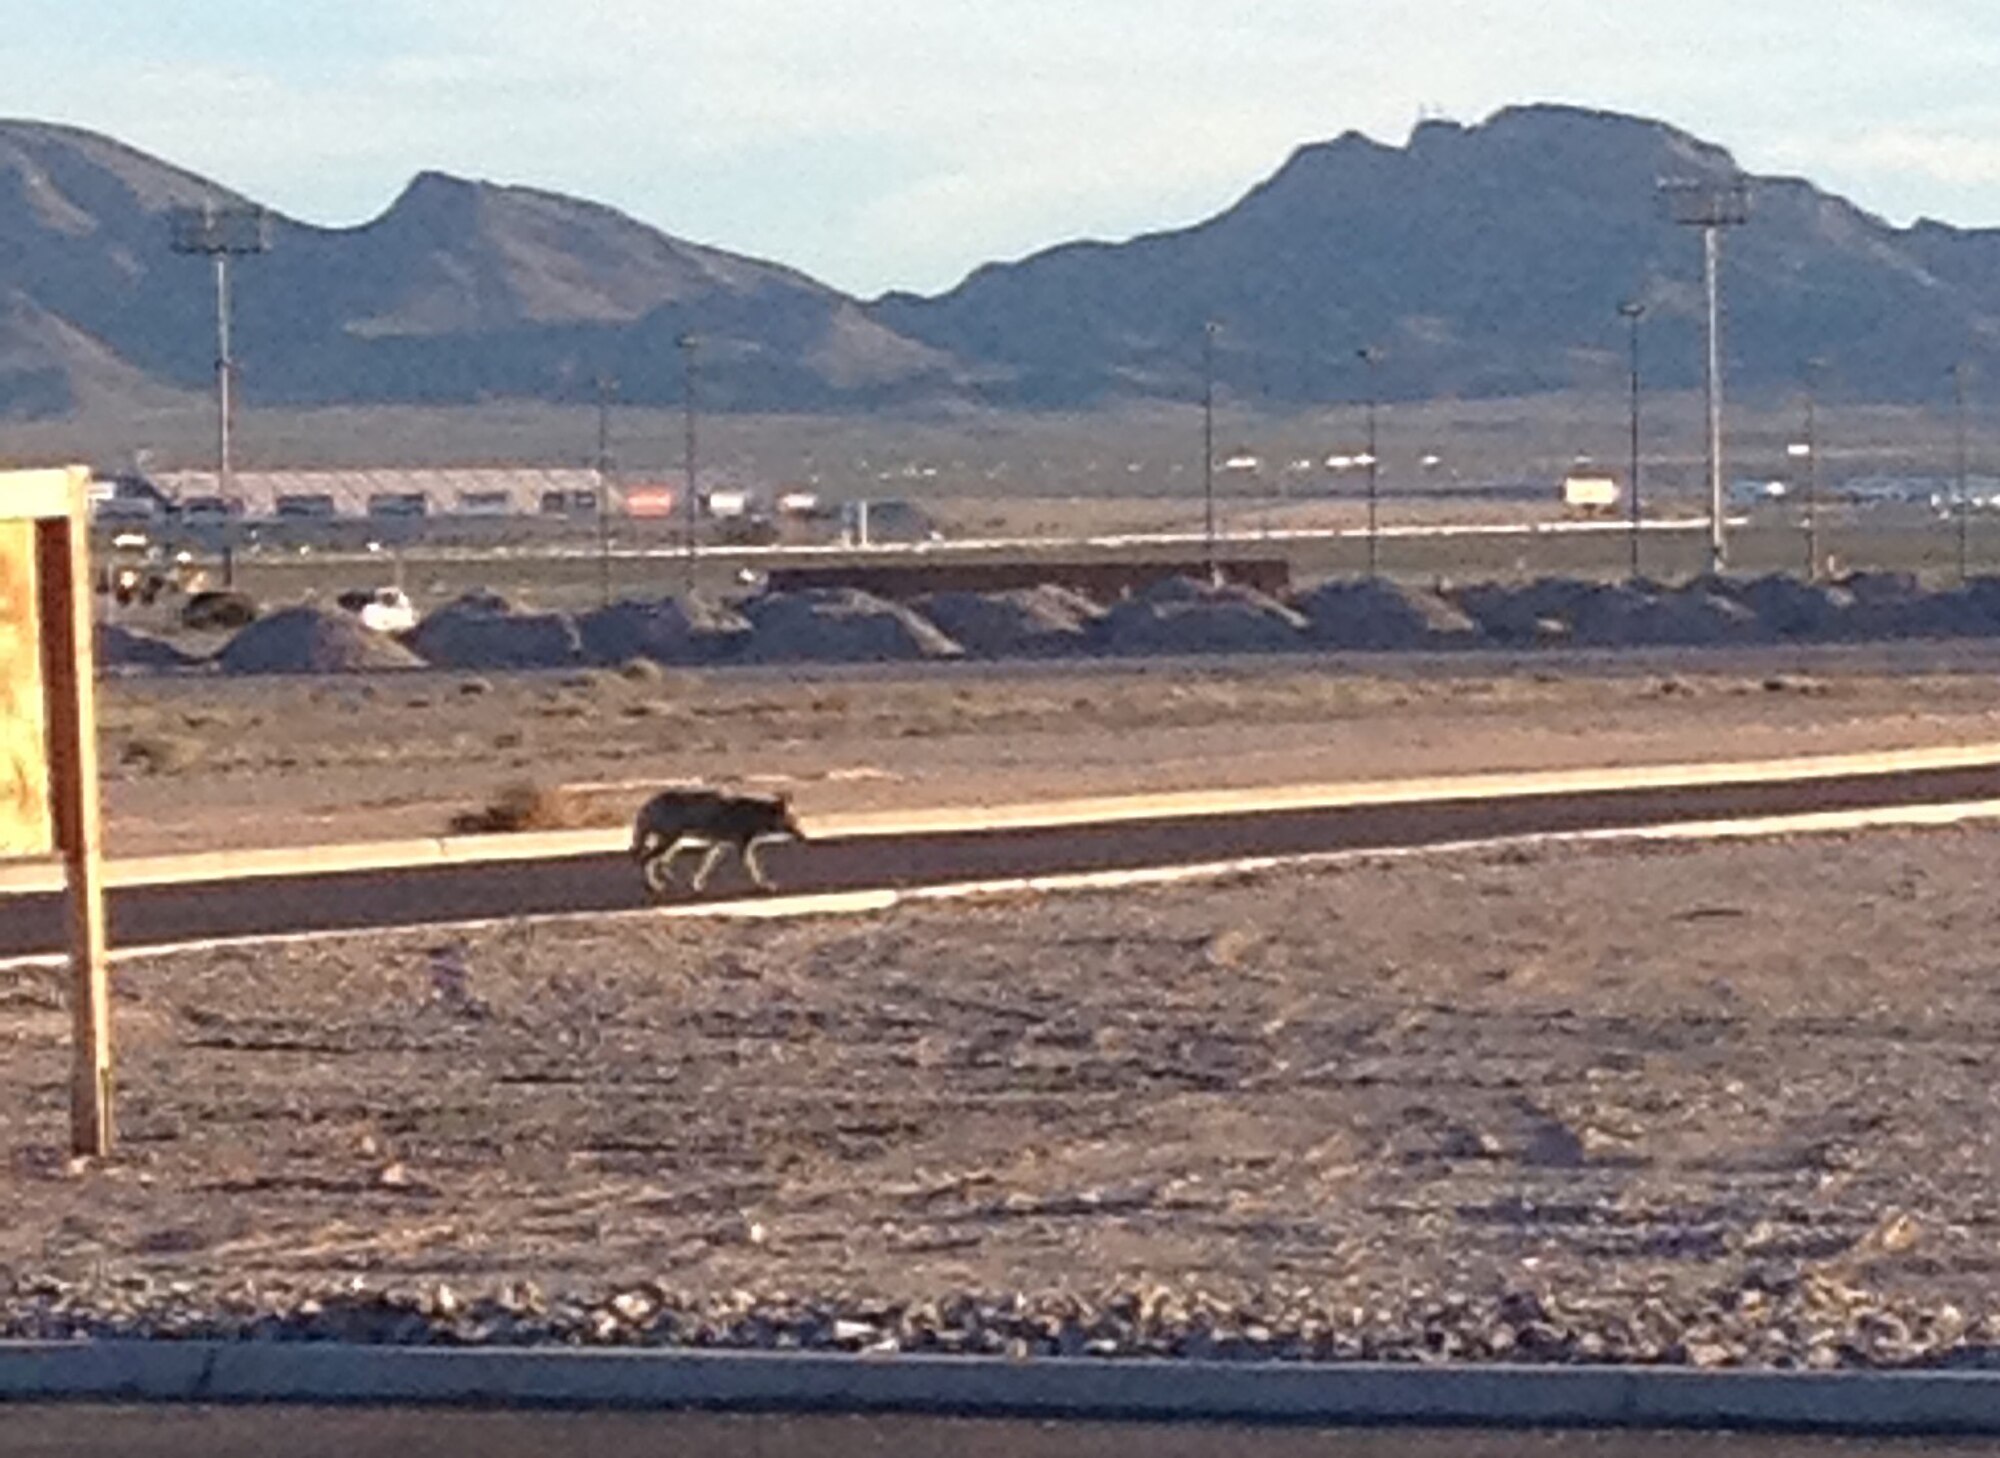 A coyote walks across the road near the air traffic control tower on Nellis Air Force Base, Nev., March 26, 2015. With coyote sightings becoming more frequent on base, Airmen need to be aware of the risk they pose not only to people but aircraft as well. (Courtesy photo)